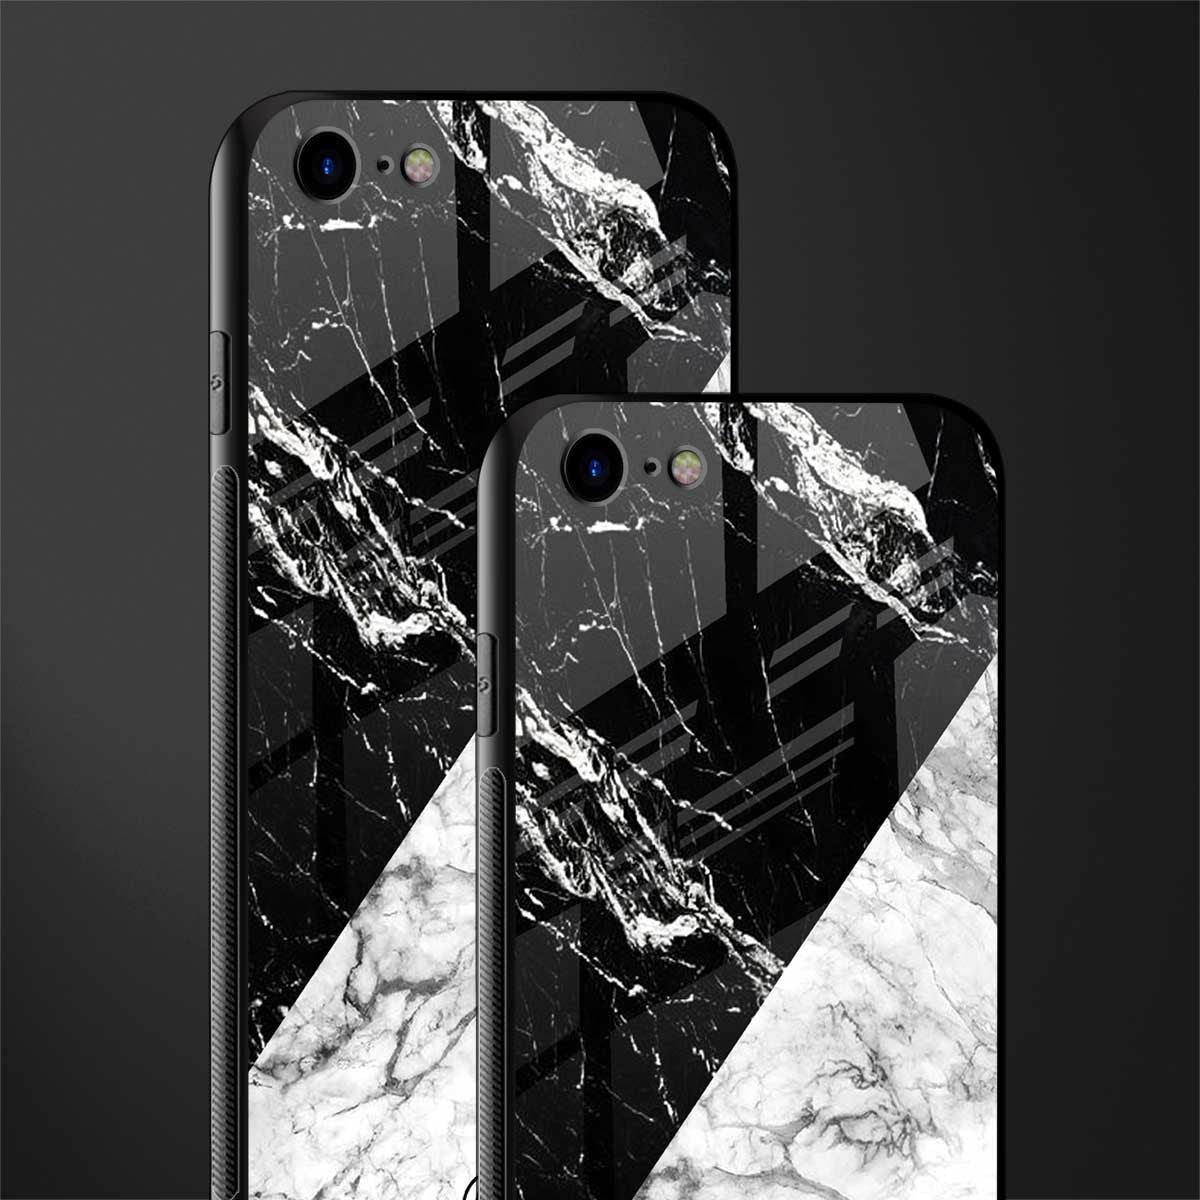 fatal contradiction phone cover for iphone 7